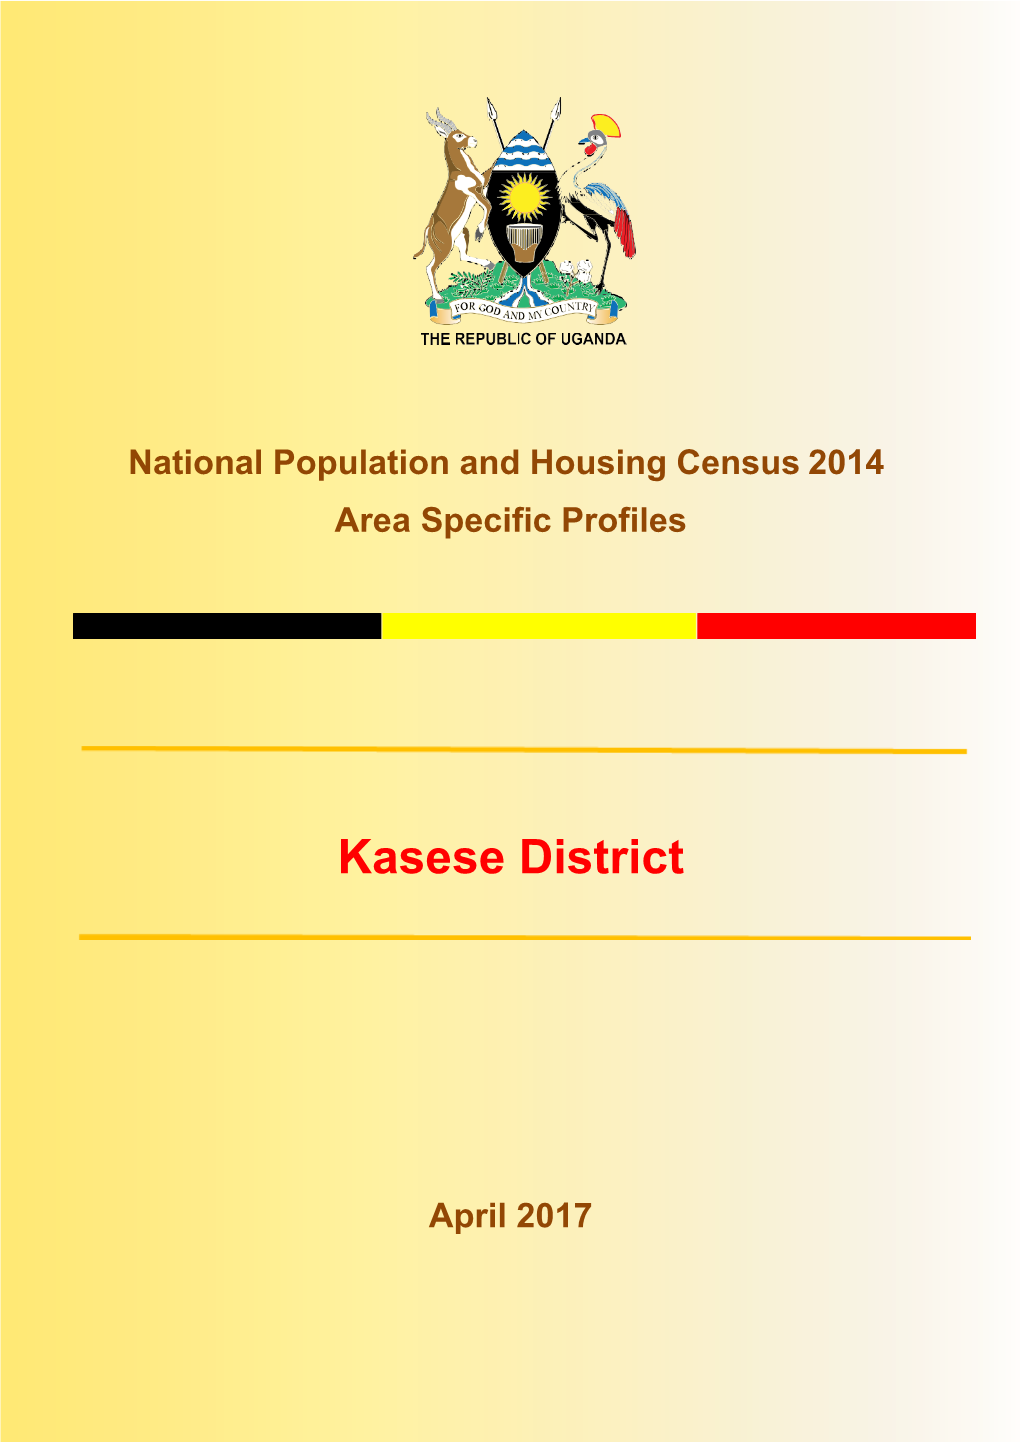 Kasese District